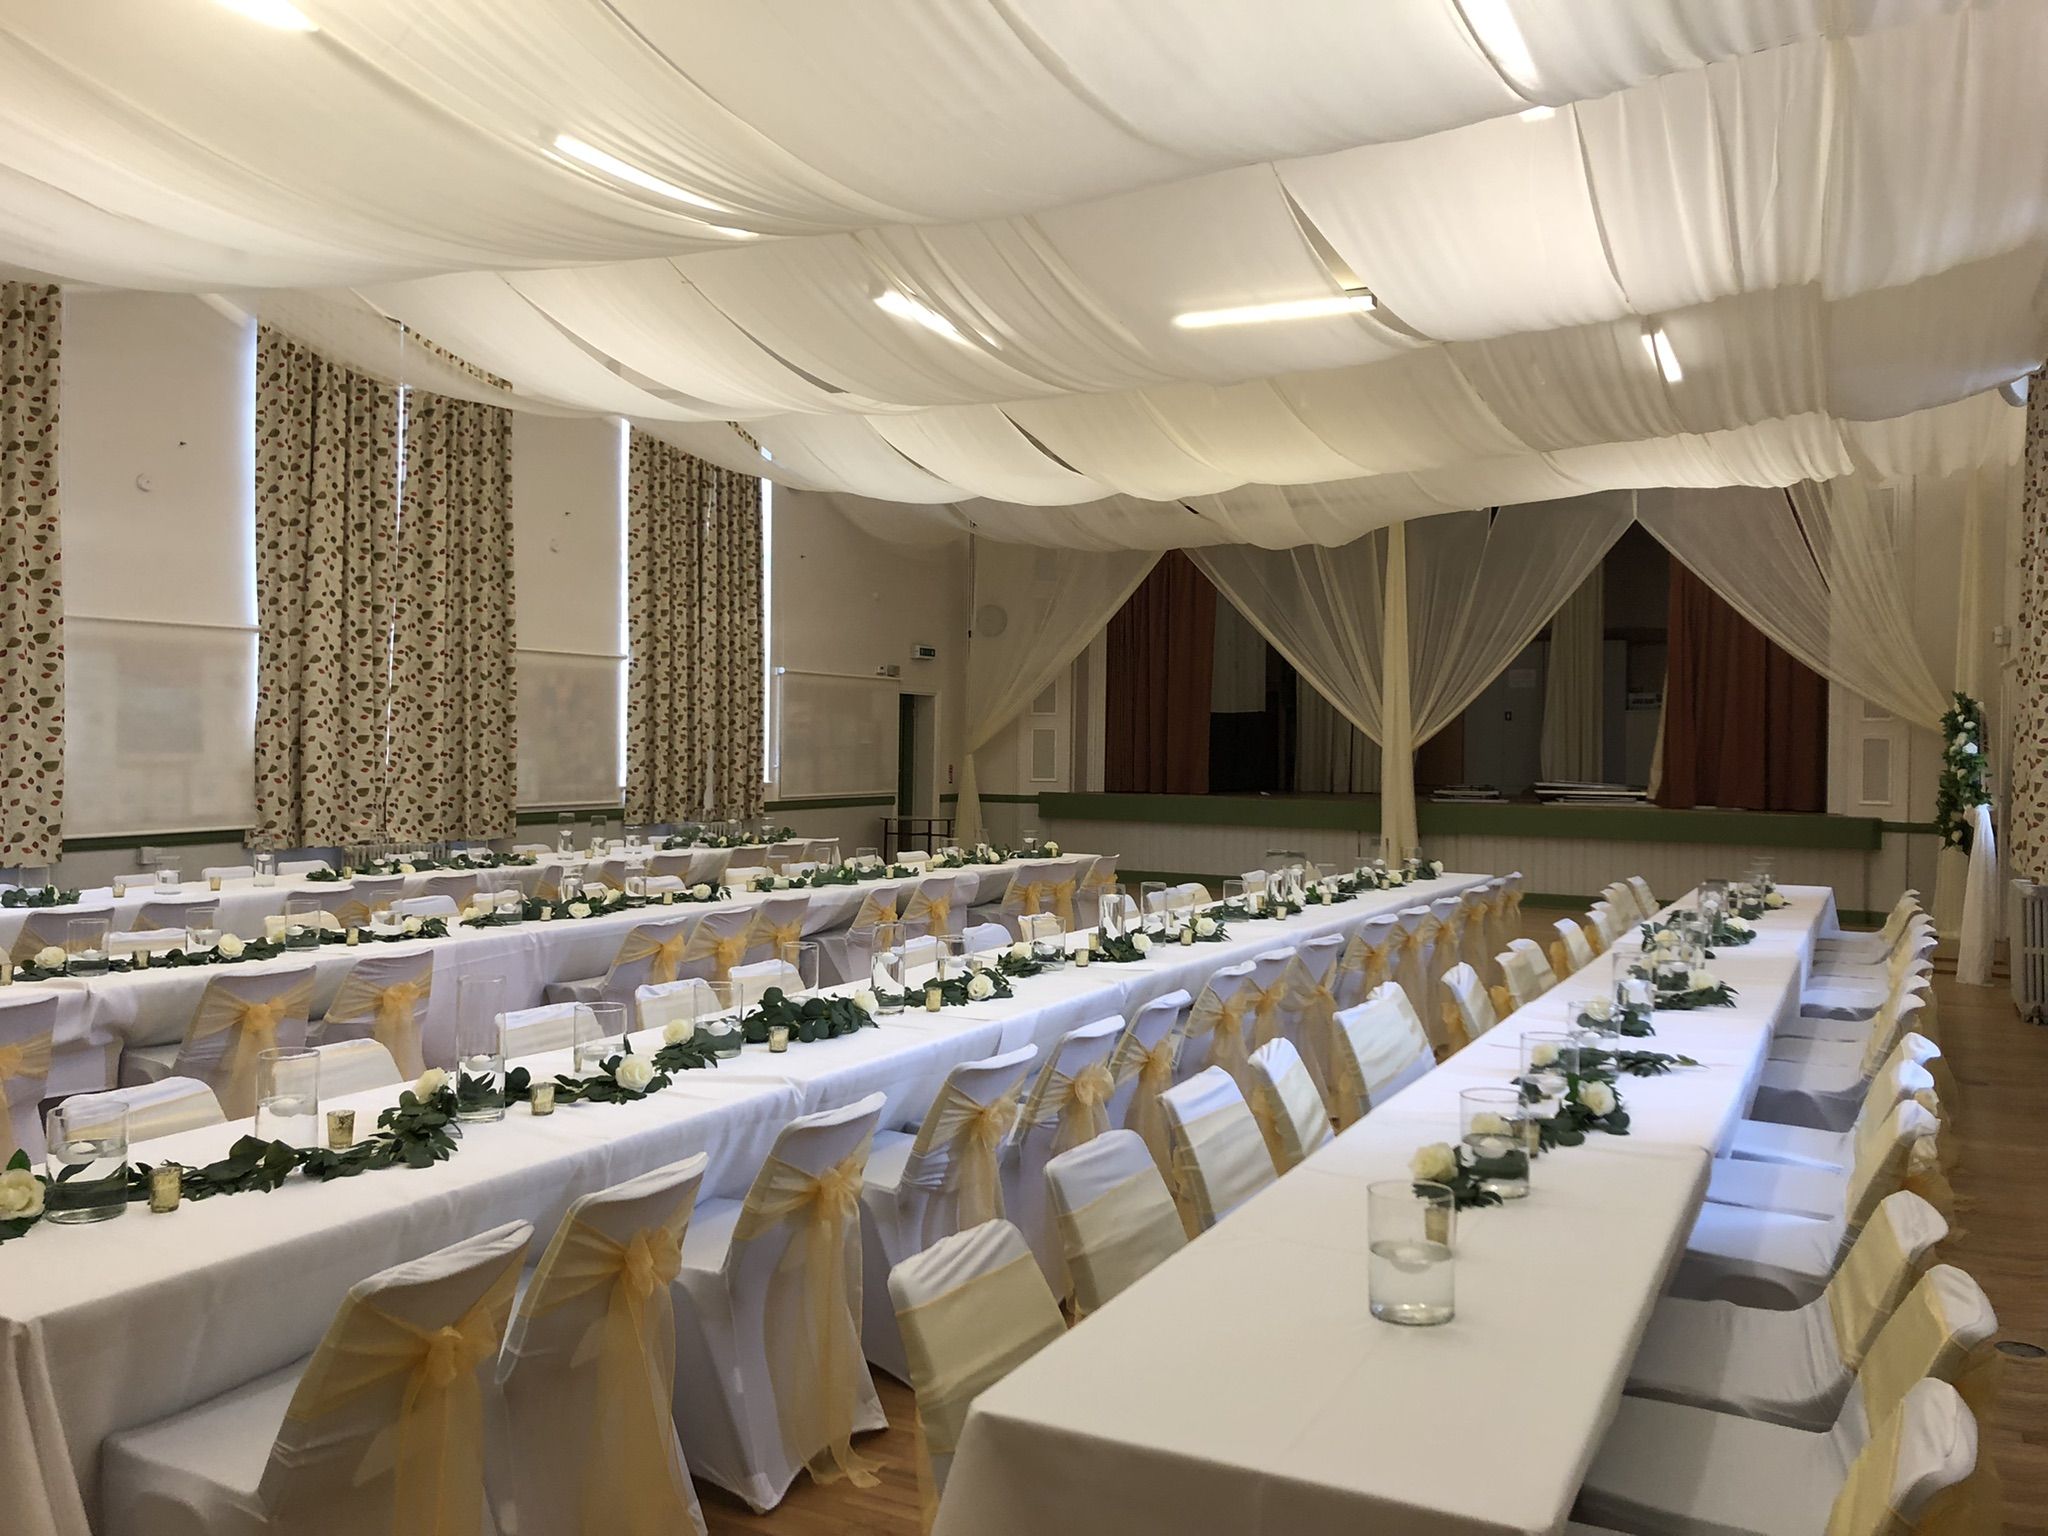 a banquet hall set up for a formal function.